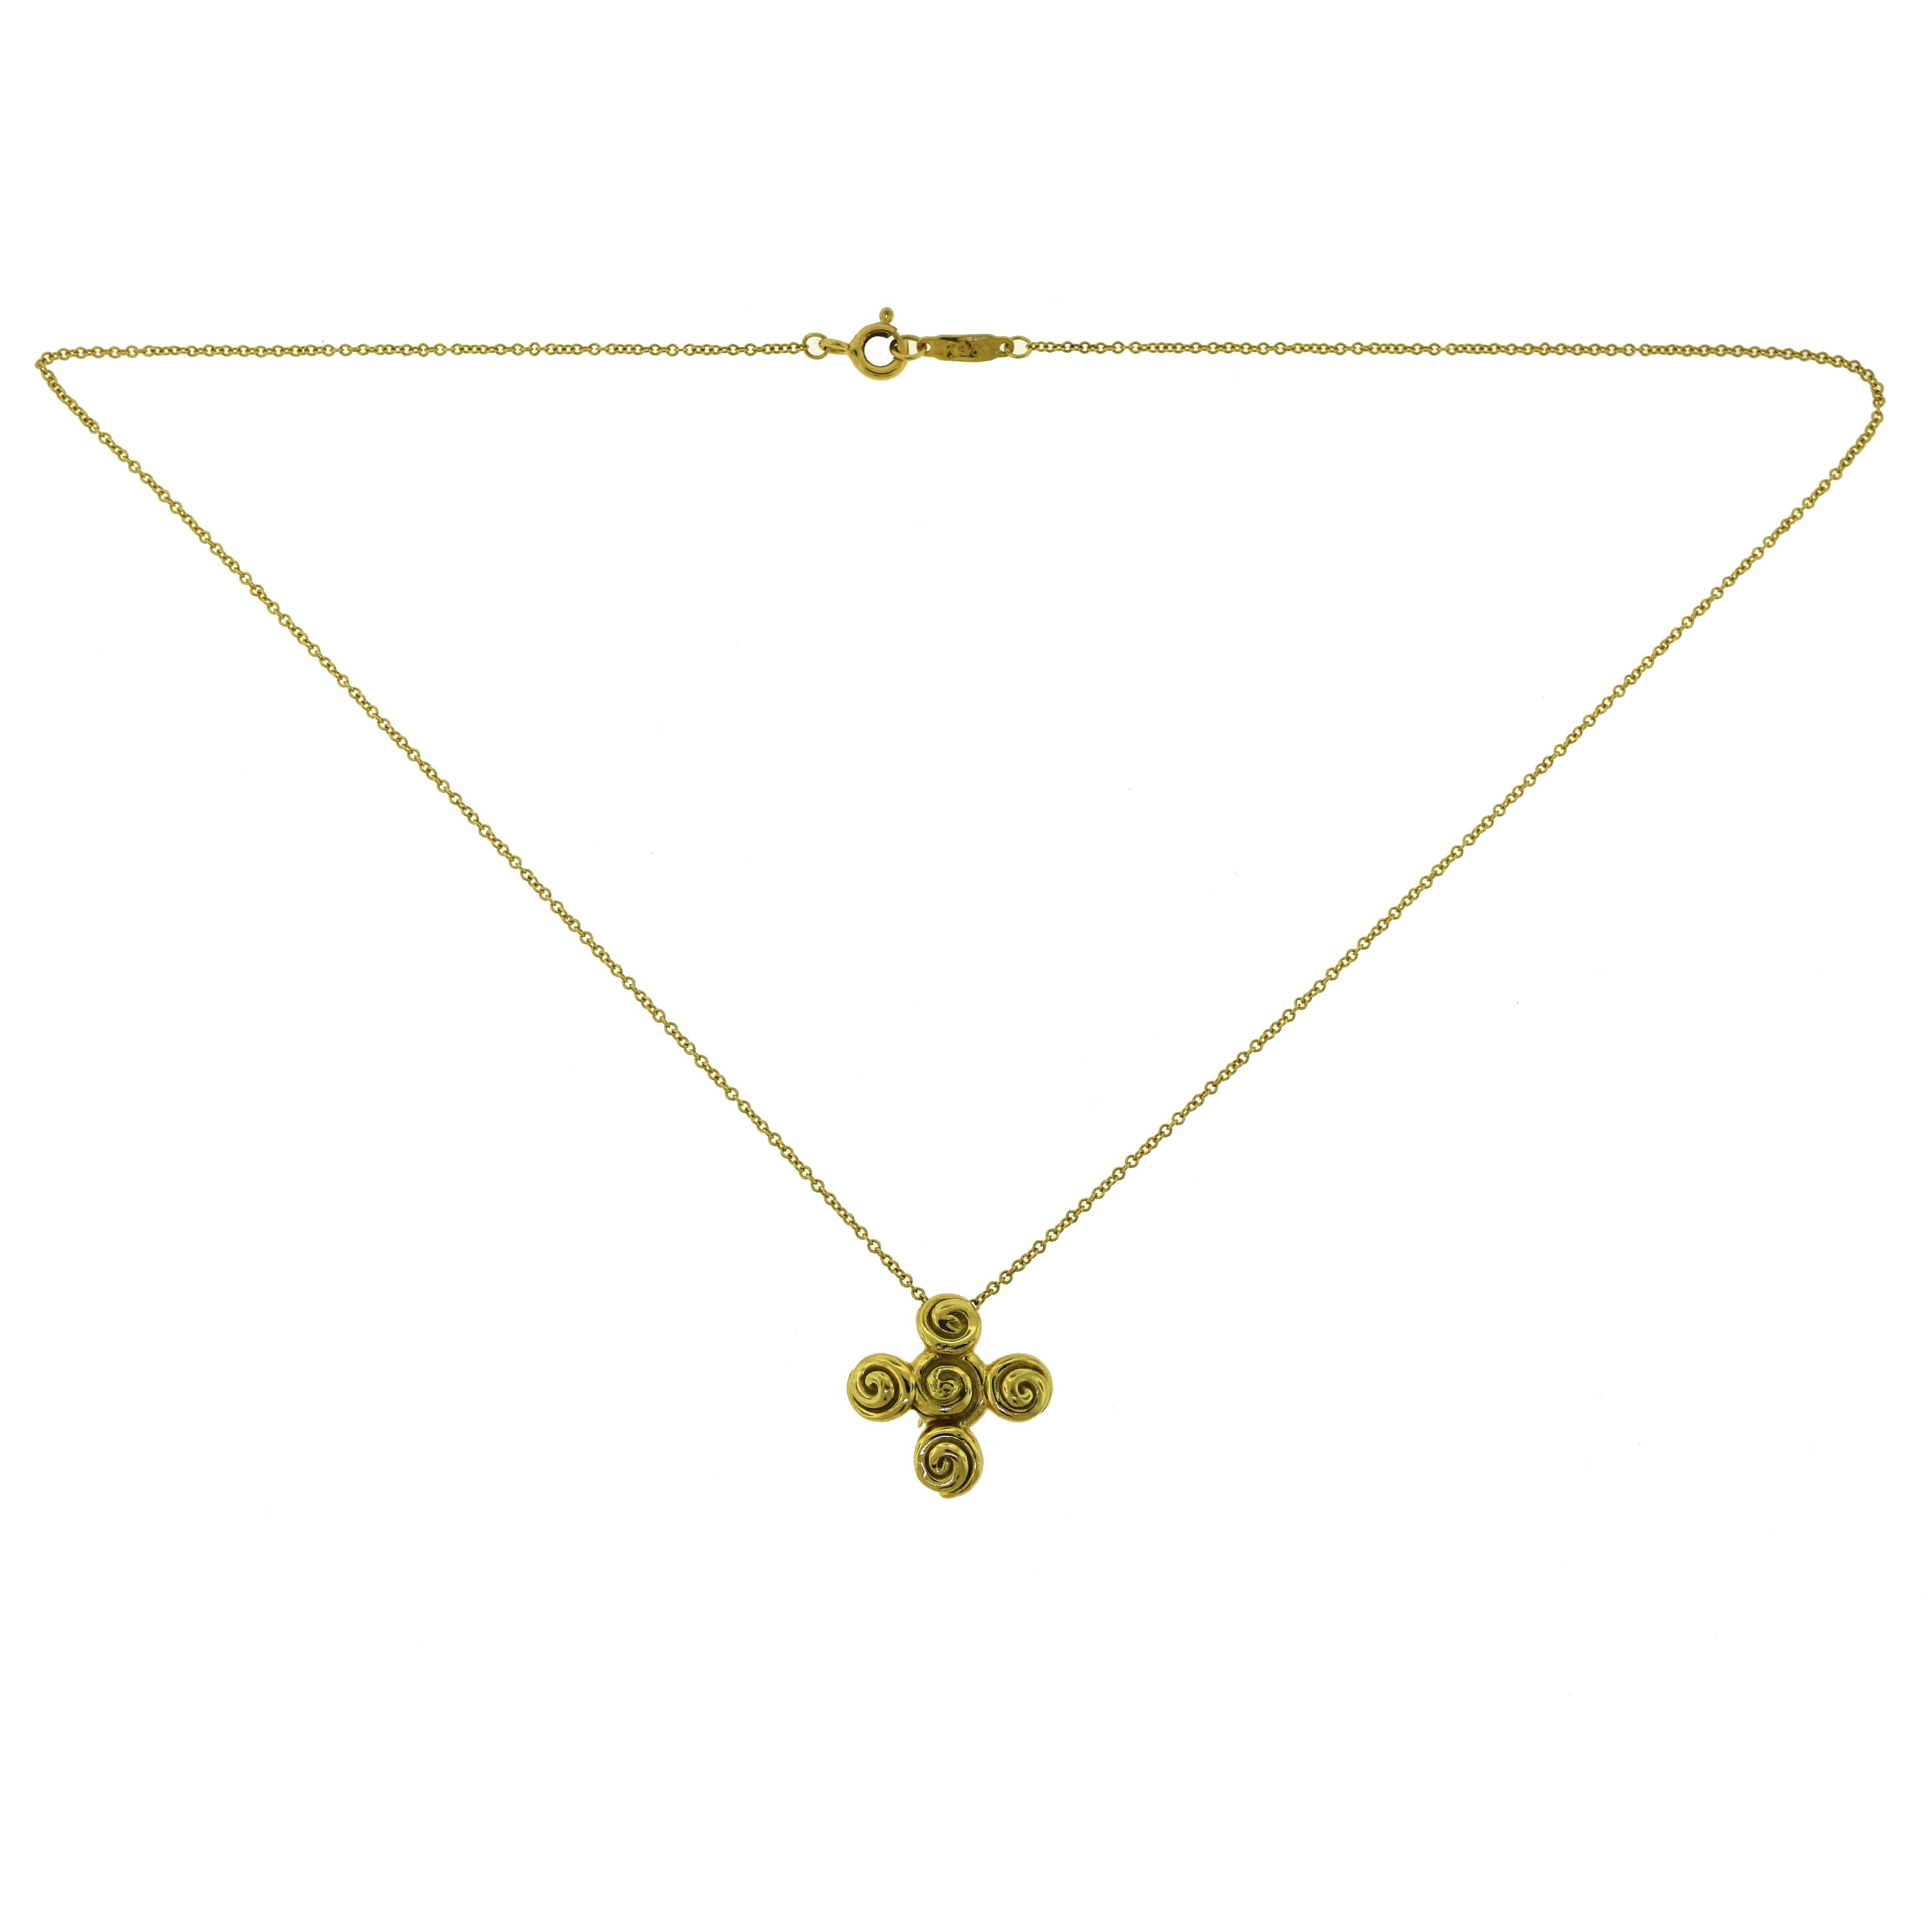 Brilliance Jewels, Miami
Questions? Call Us Anytime!
786,482,8100

Designer: Tiffany & Co.

Collection: Spiro Swirl

Style: Necklace

Metal: Yellow Gold

Metal Purity: 18k

Total Item Weight (grams):  6.4

Necklace Length: 16 inches

Pendant : 17 mm